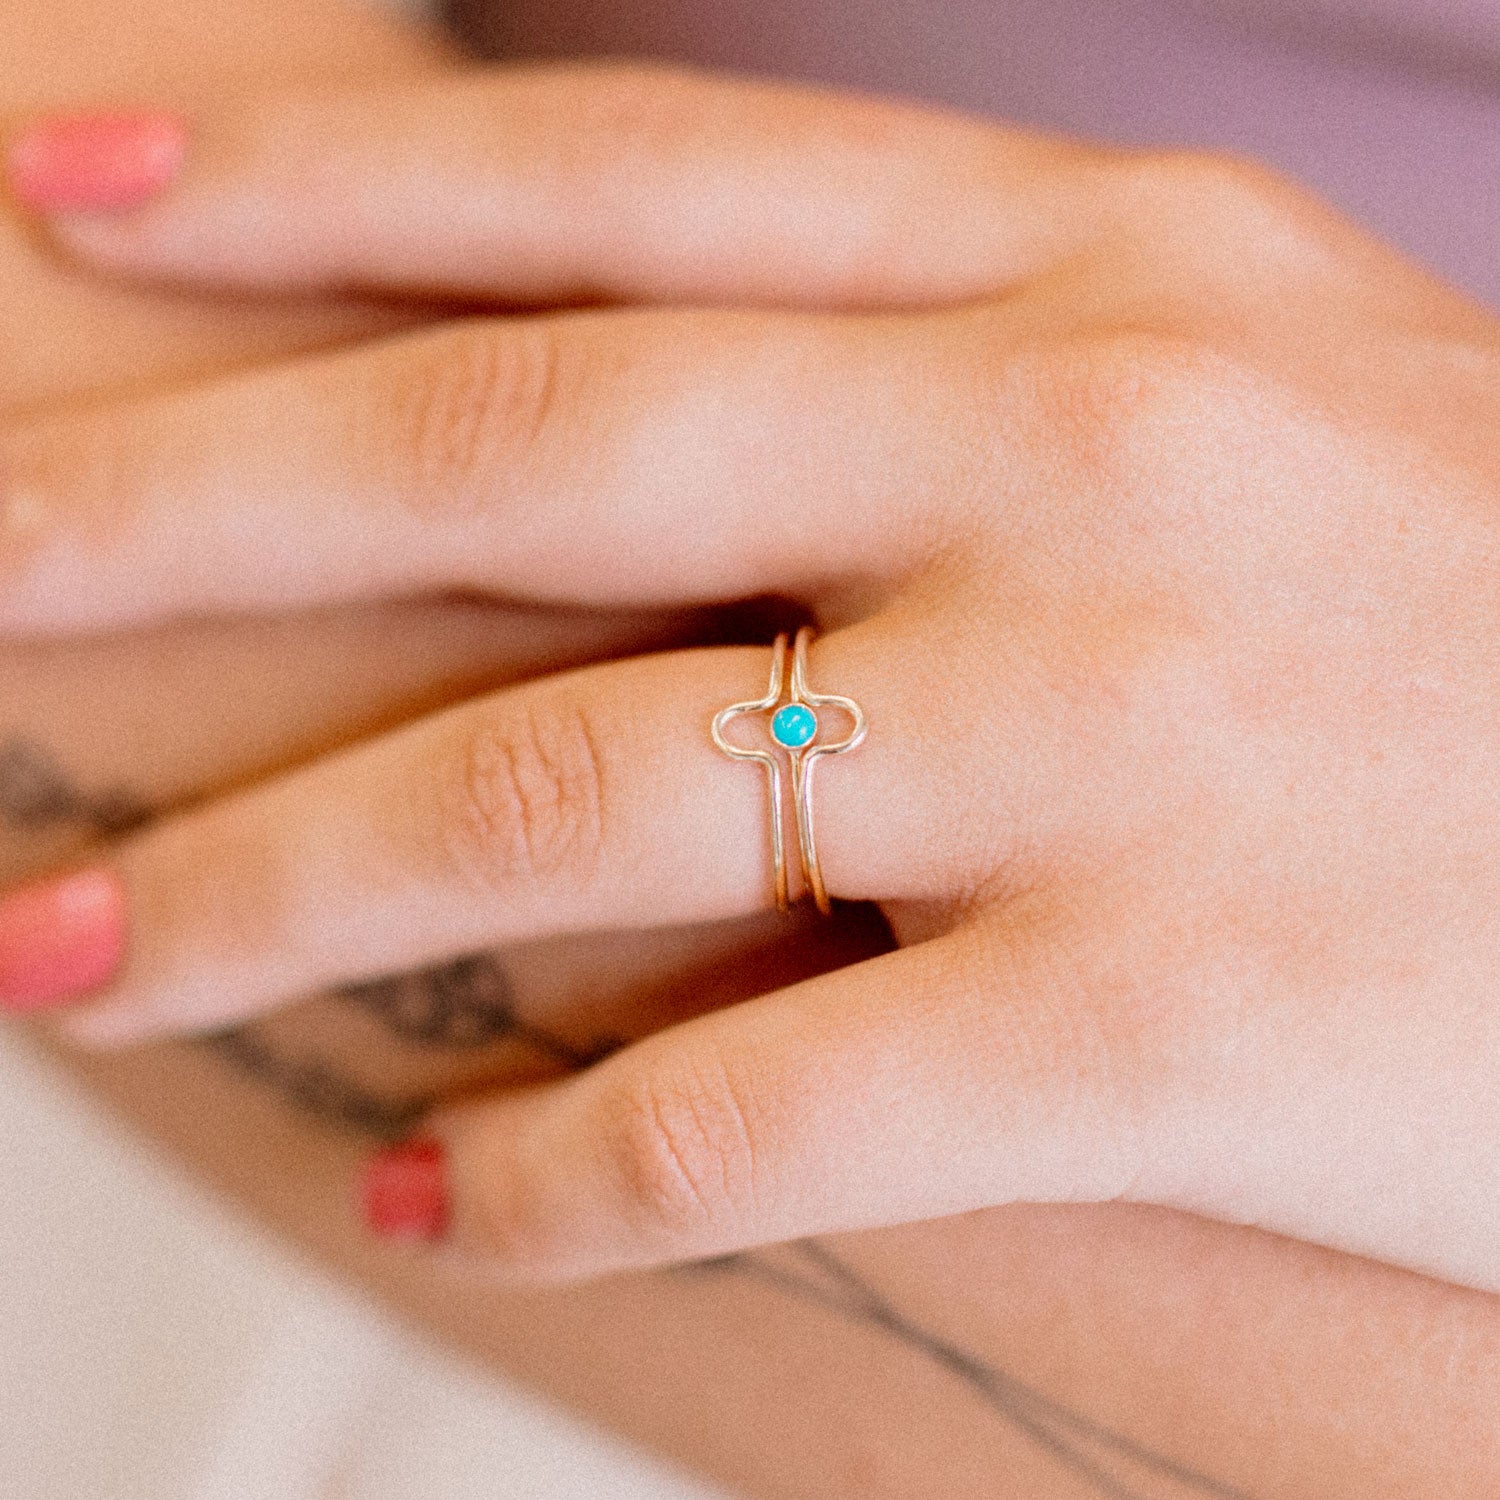 Turquoise Art Deco Inspired Stacking Ring Set - Favor Jewelry